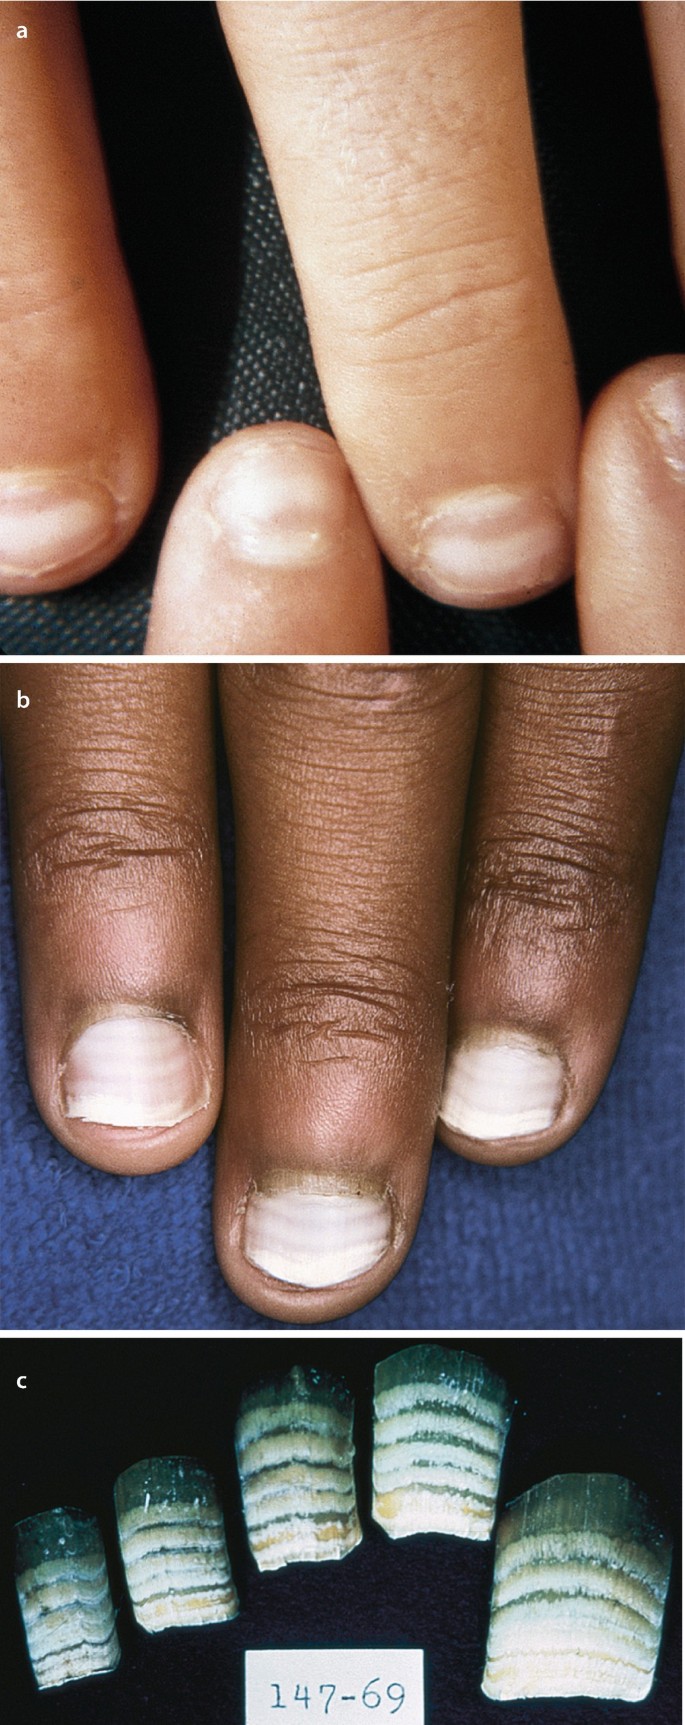 Blue nevus of the nail: A case report and review - Satolli - 2020 -  Dermatologic Therapy - Wiley Online Library